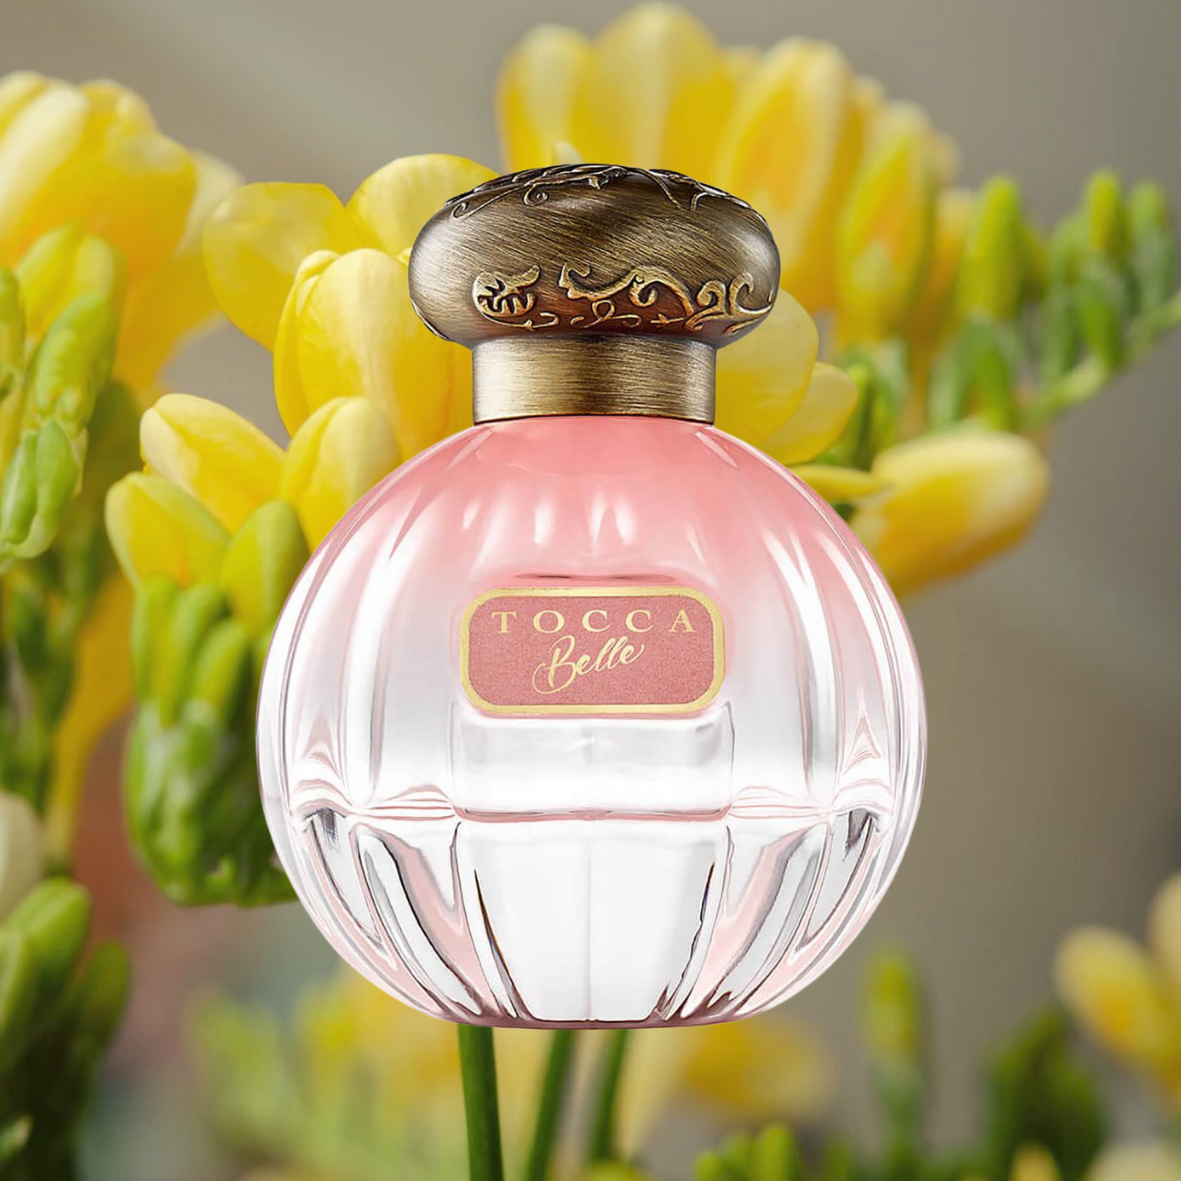 Tocca-Belle
Best freesia perfumes